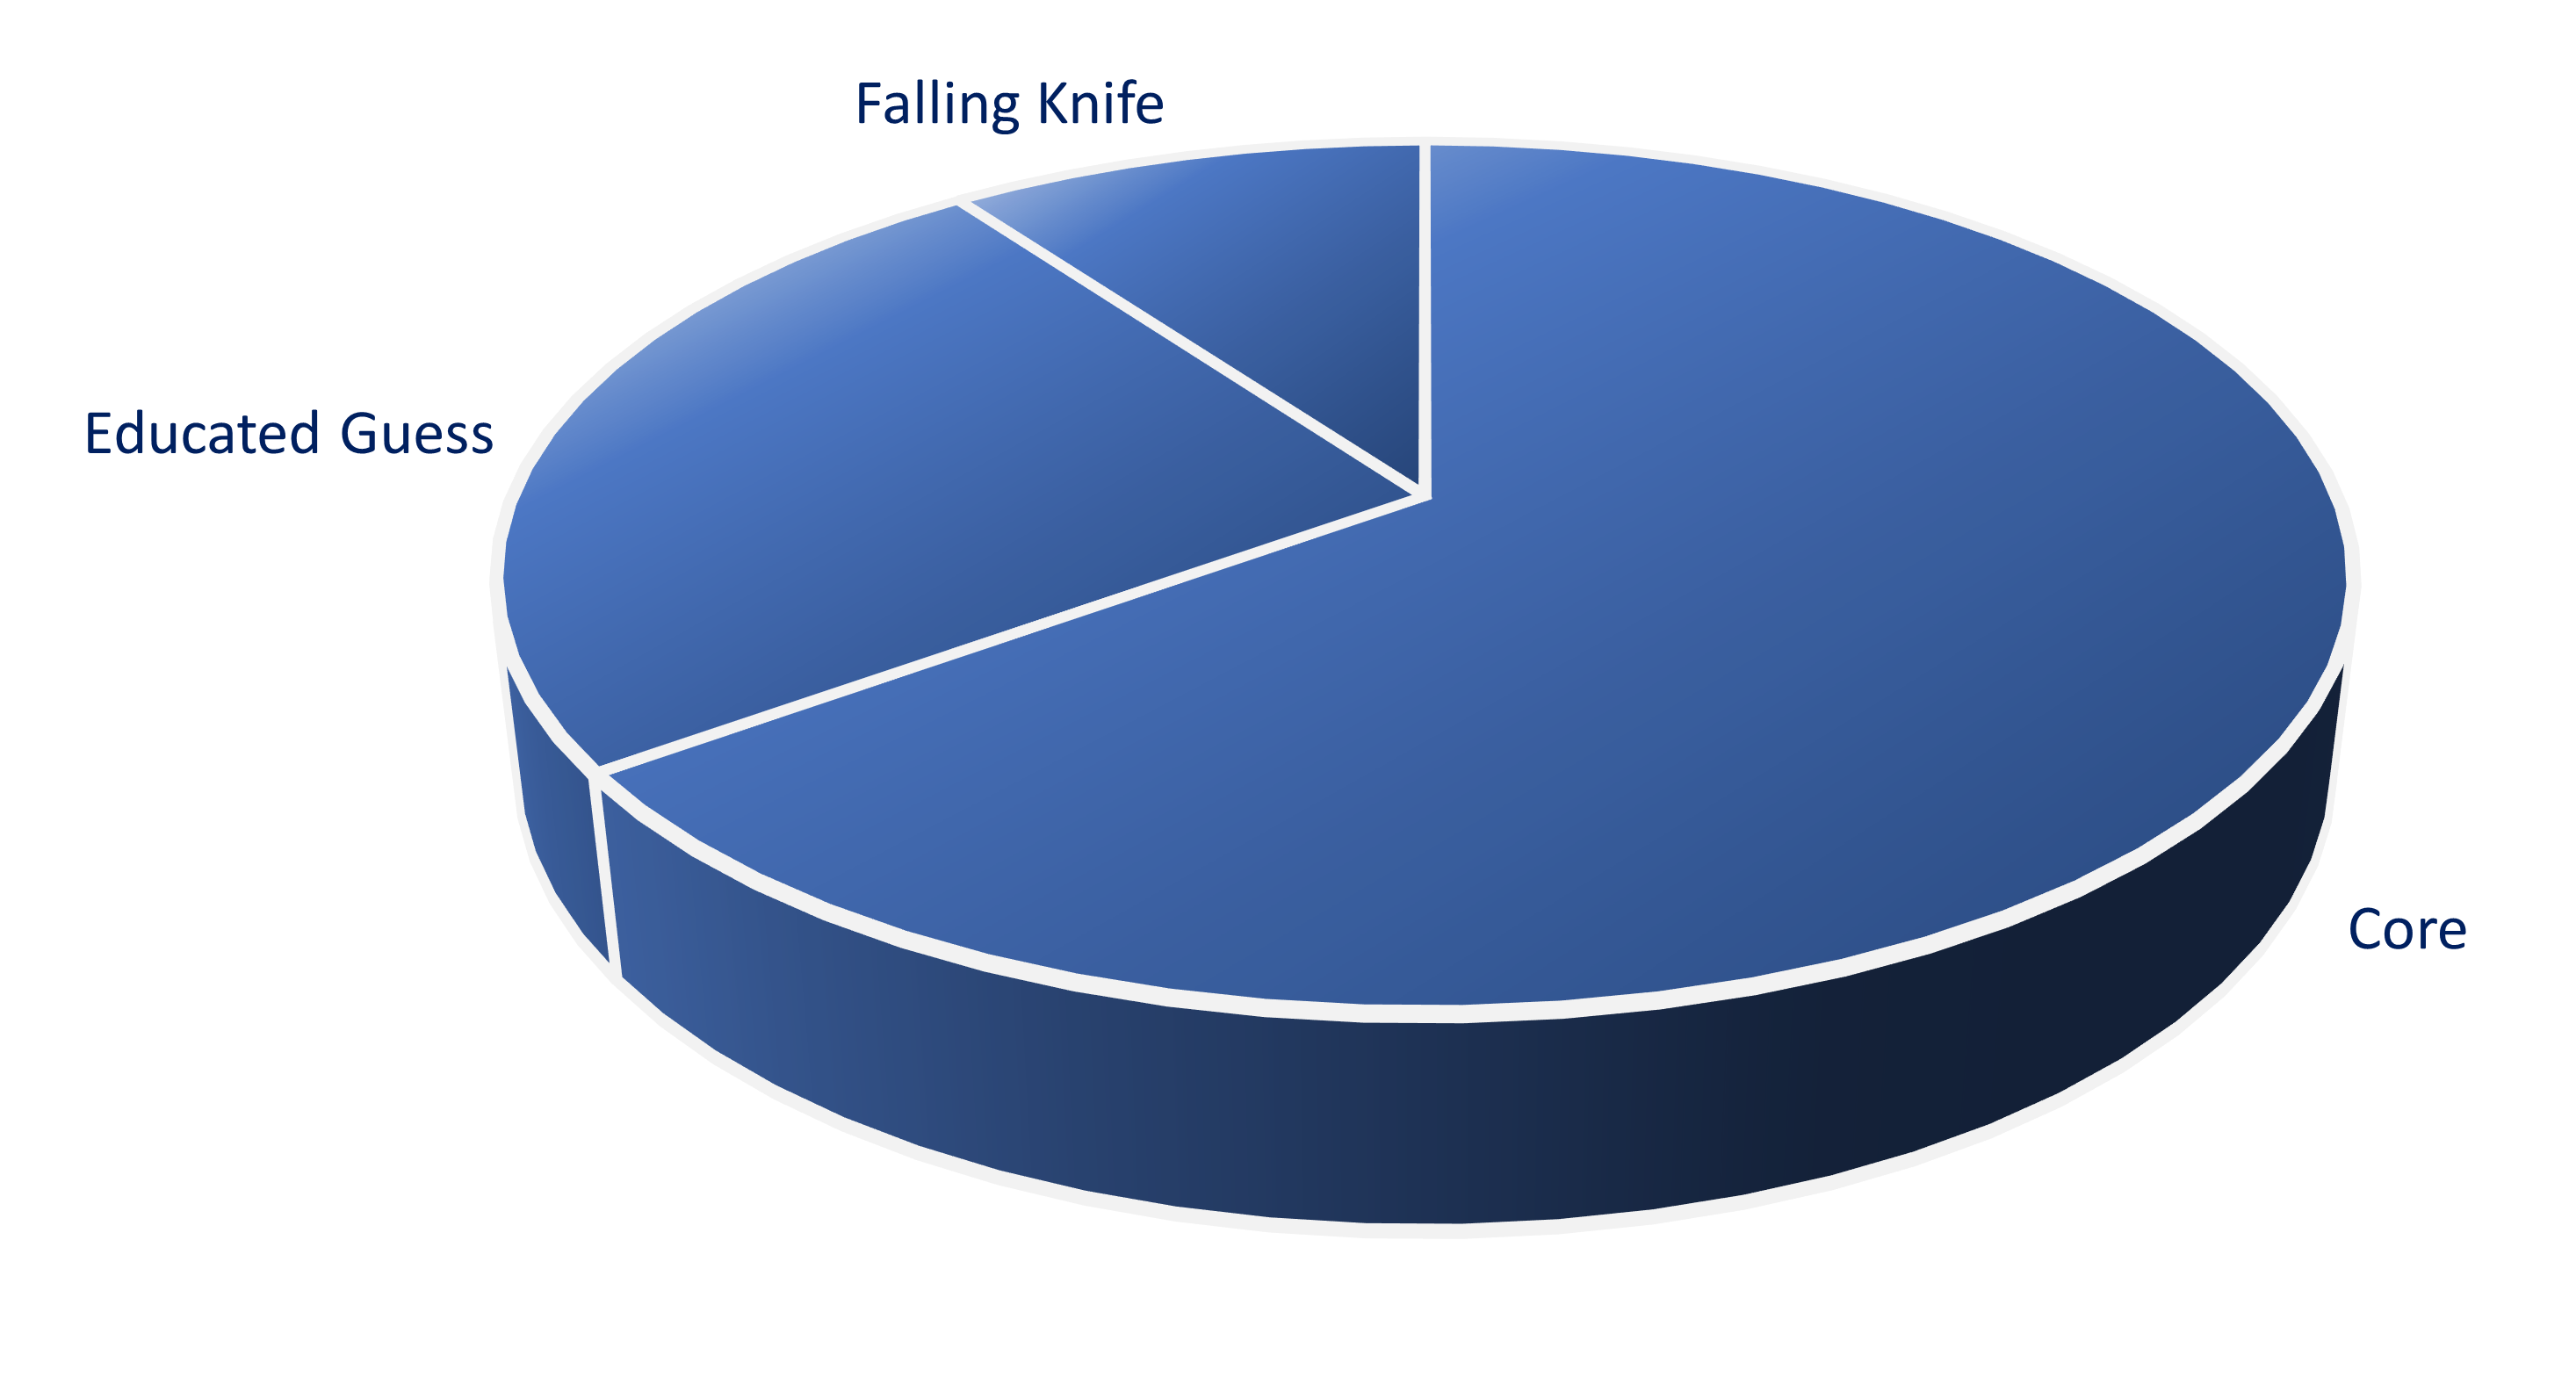 3D pie chart split between core holdings, educated guesses and falling knives